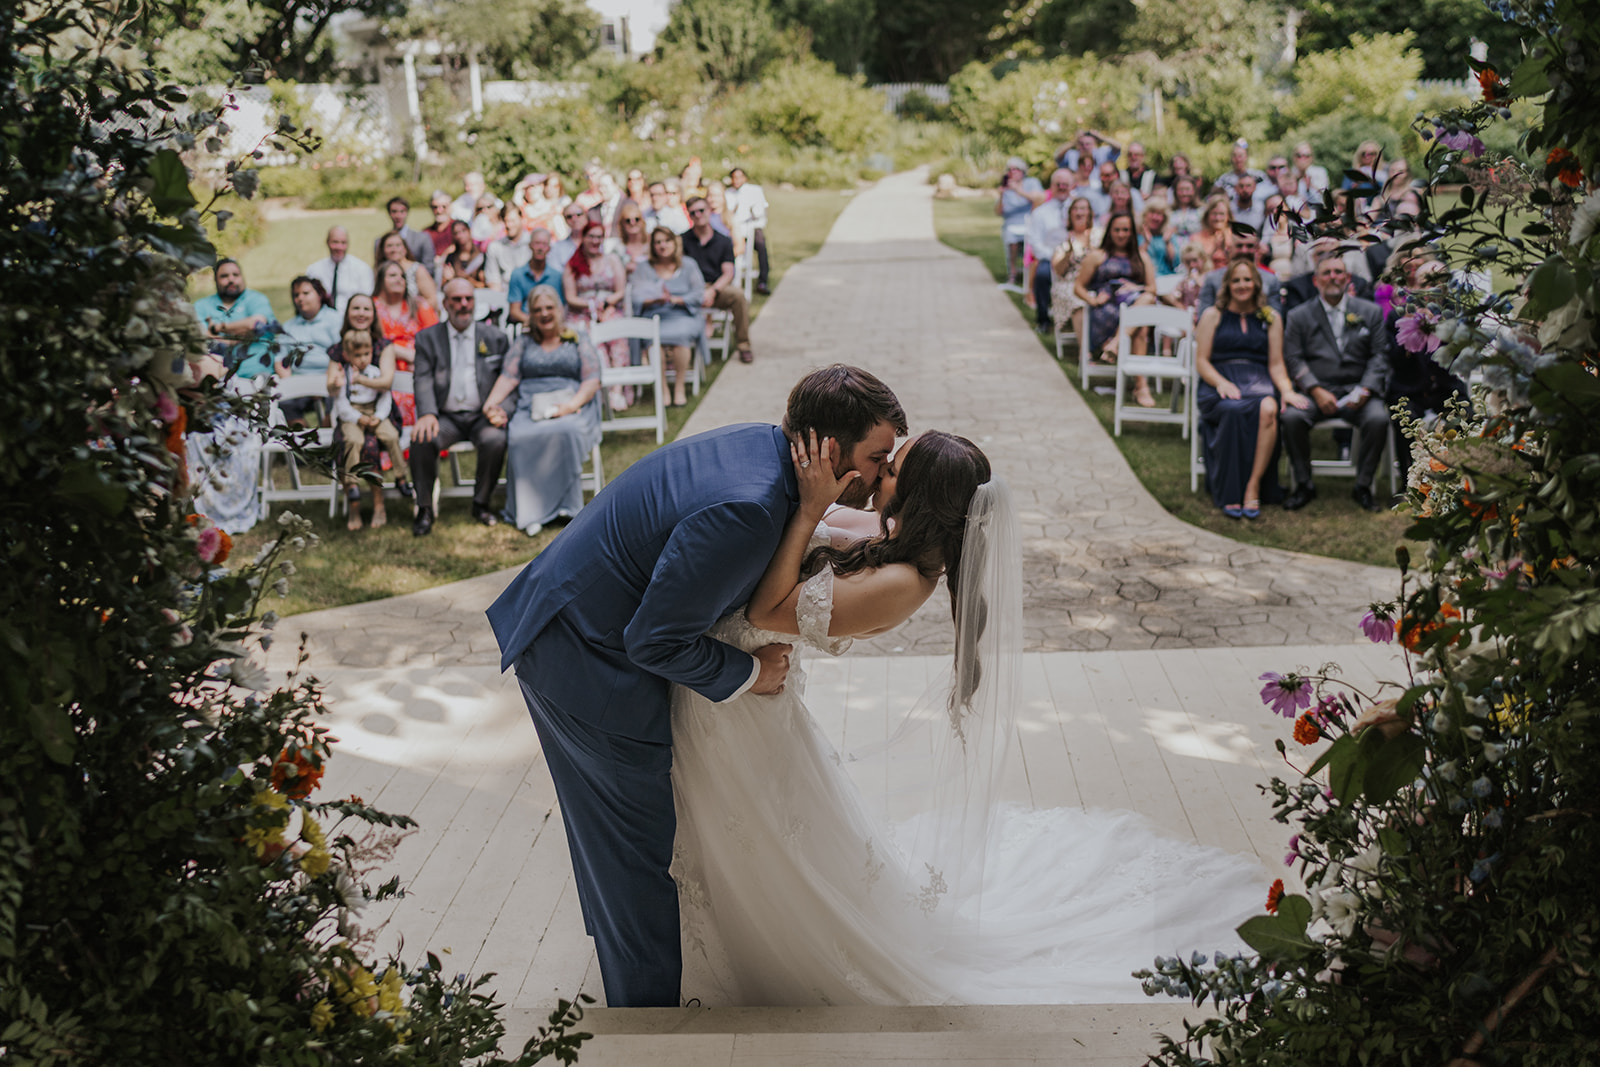 Stunning bride and groom pose share a kiss after their ceremony